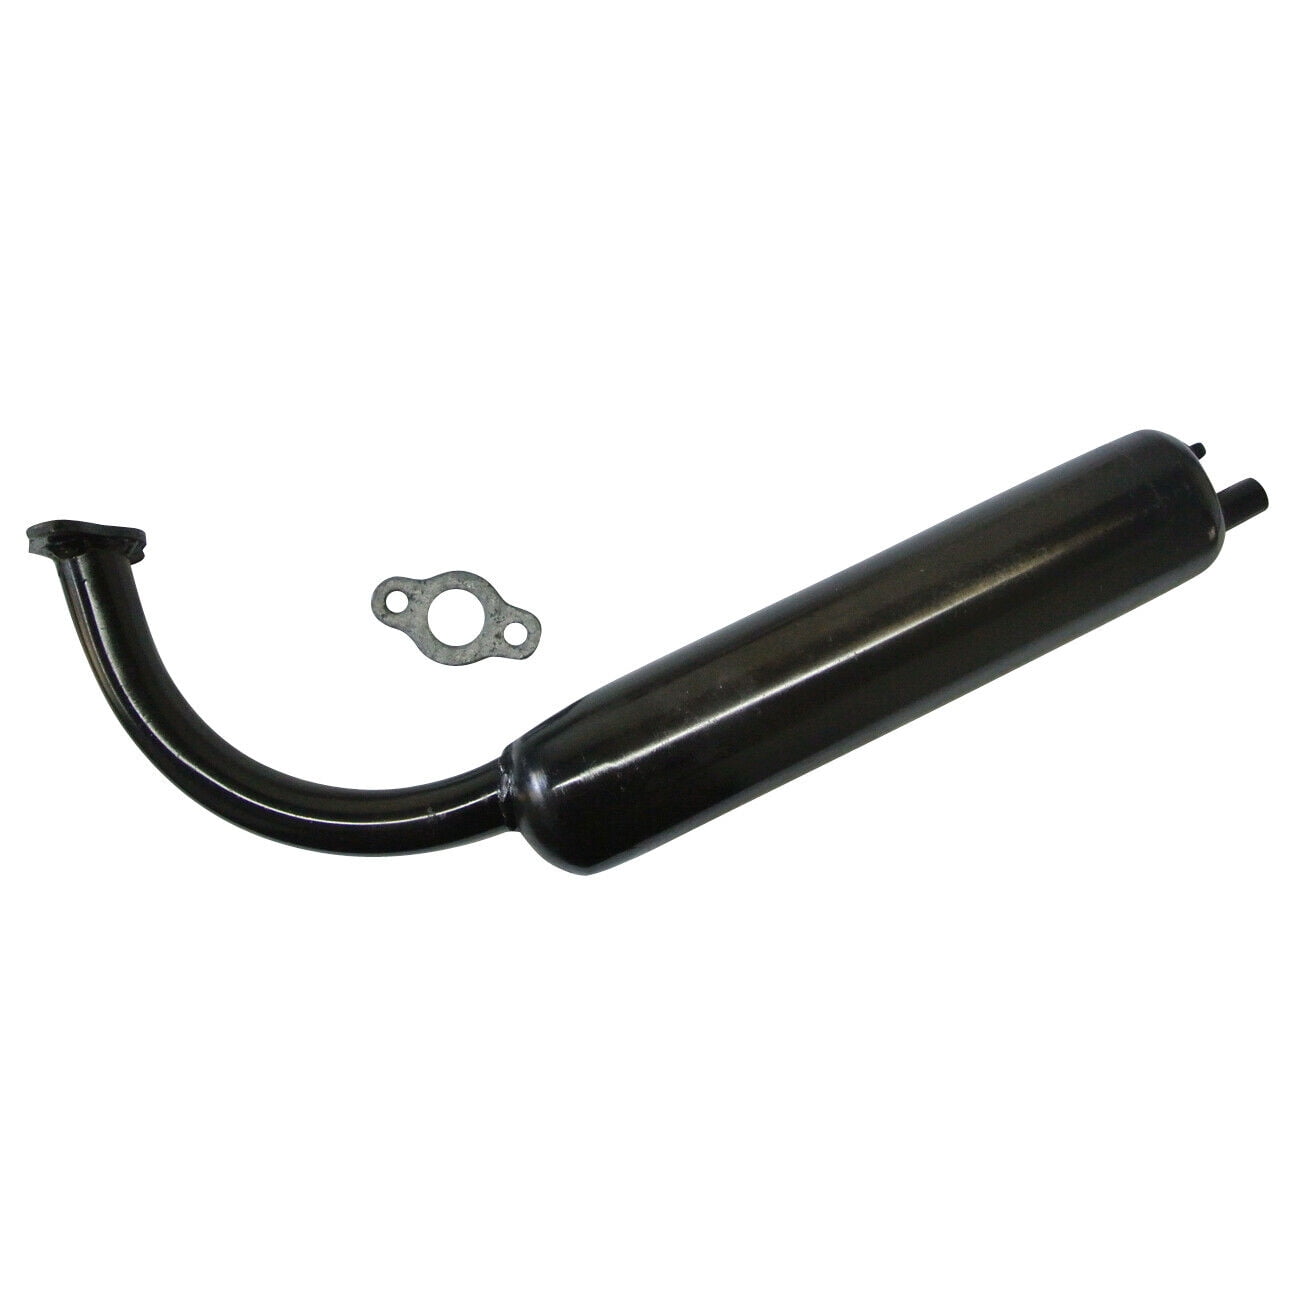 JRL Stock Muffler Exhaust Pipe Fits 80cc 66cc 49cc Motorized Bicycle Silencer 